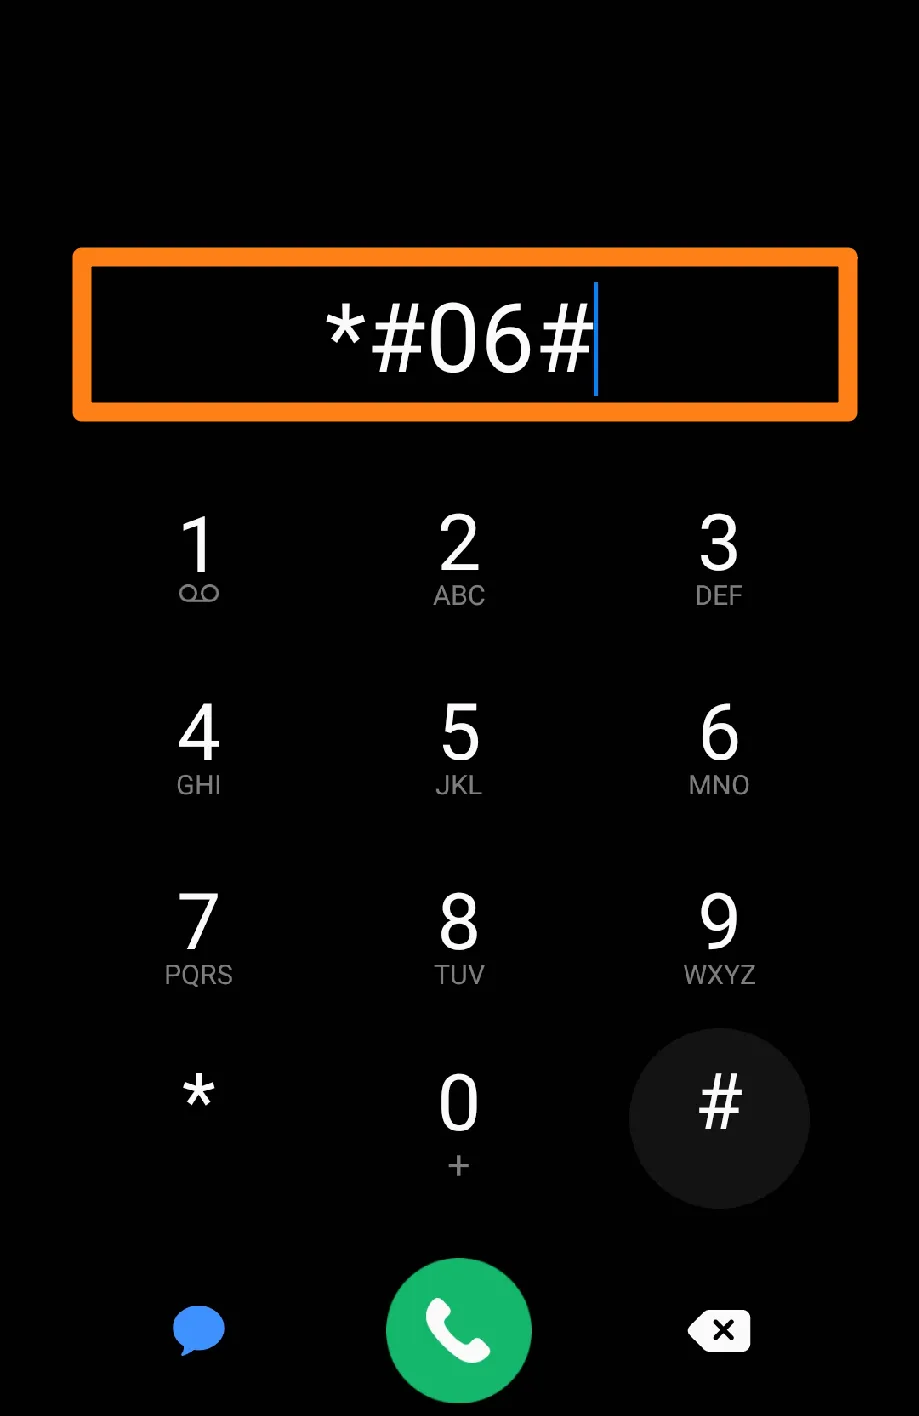 enter code *#06# How to Find Samsung Galaxy IMEI Number